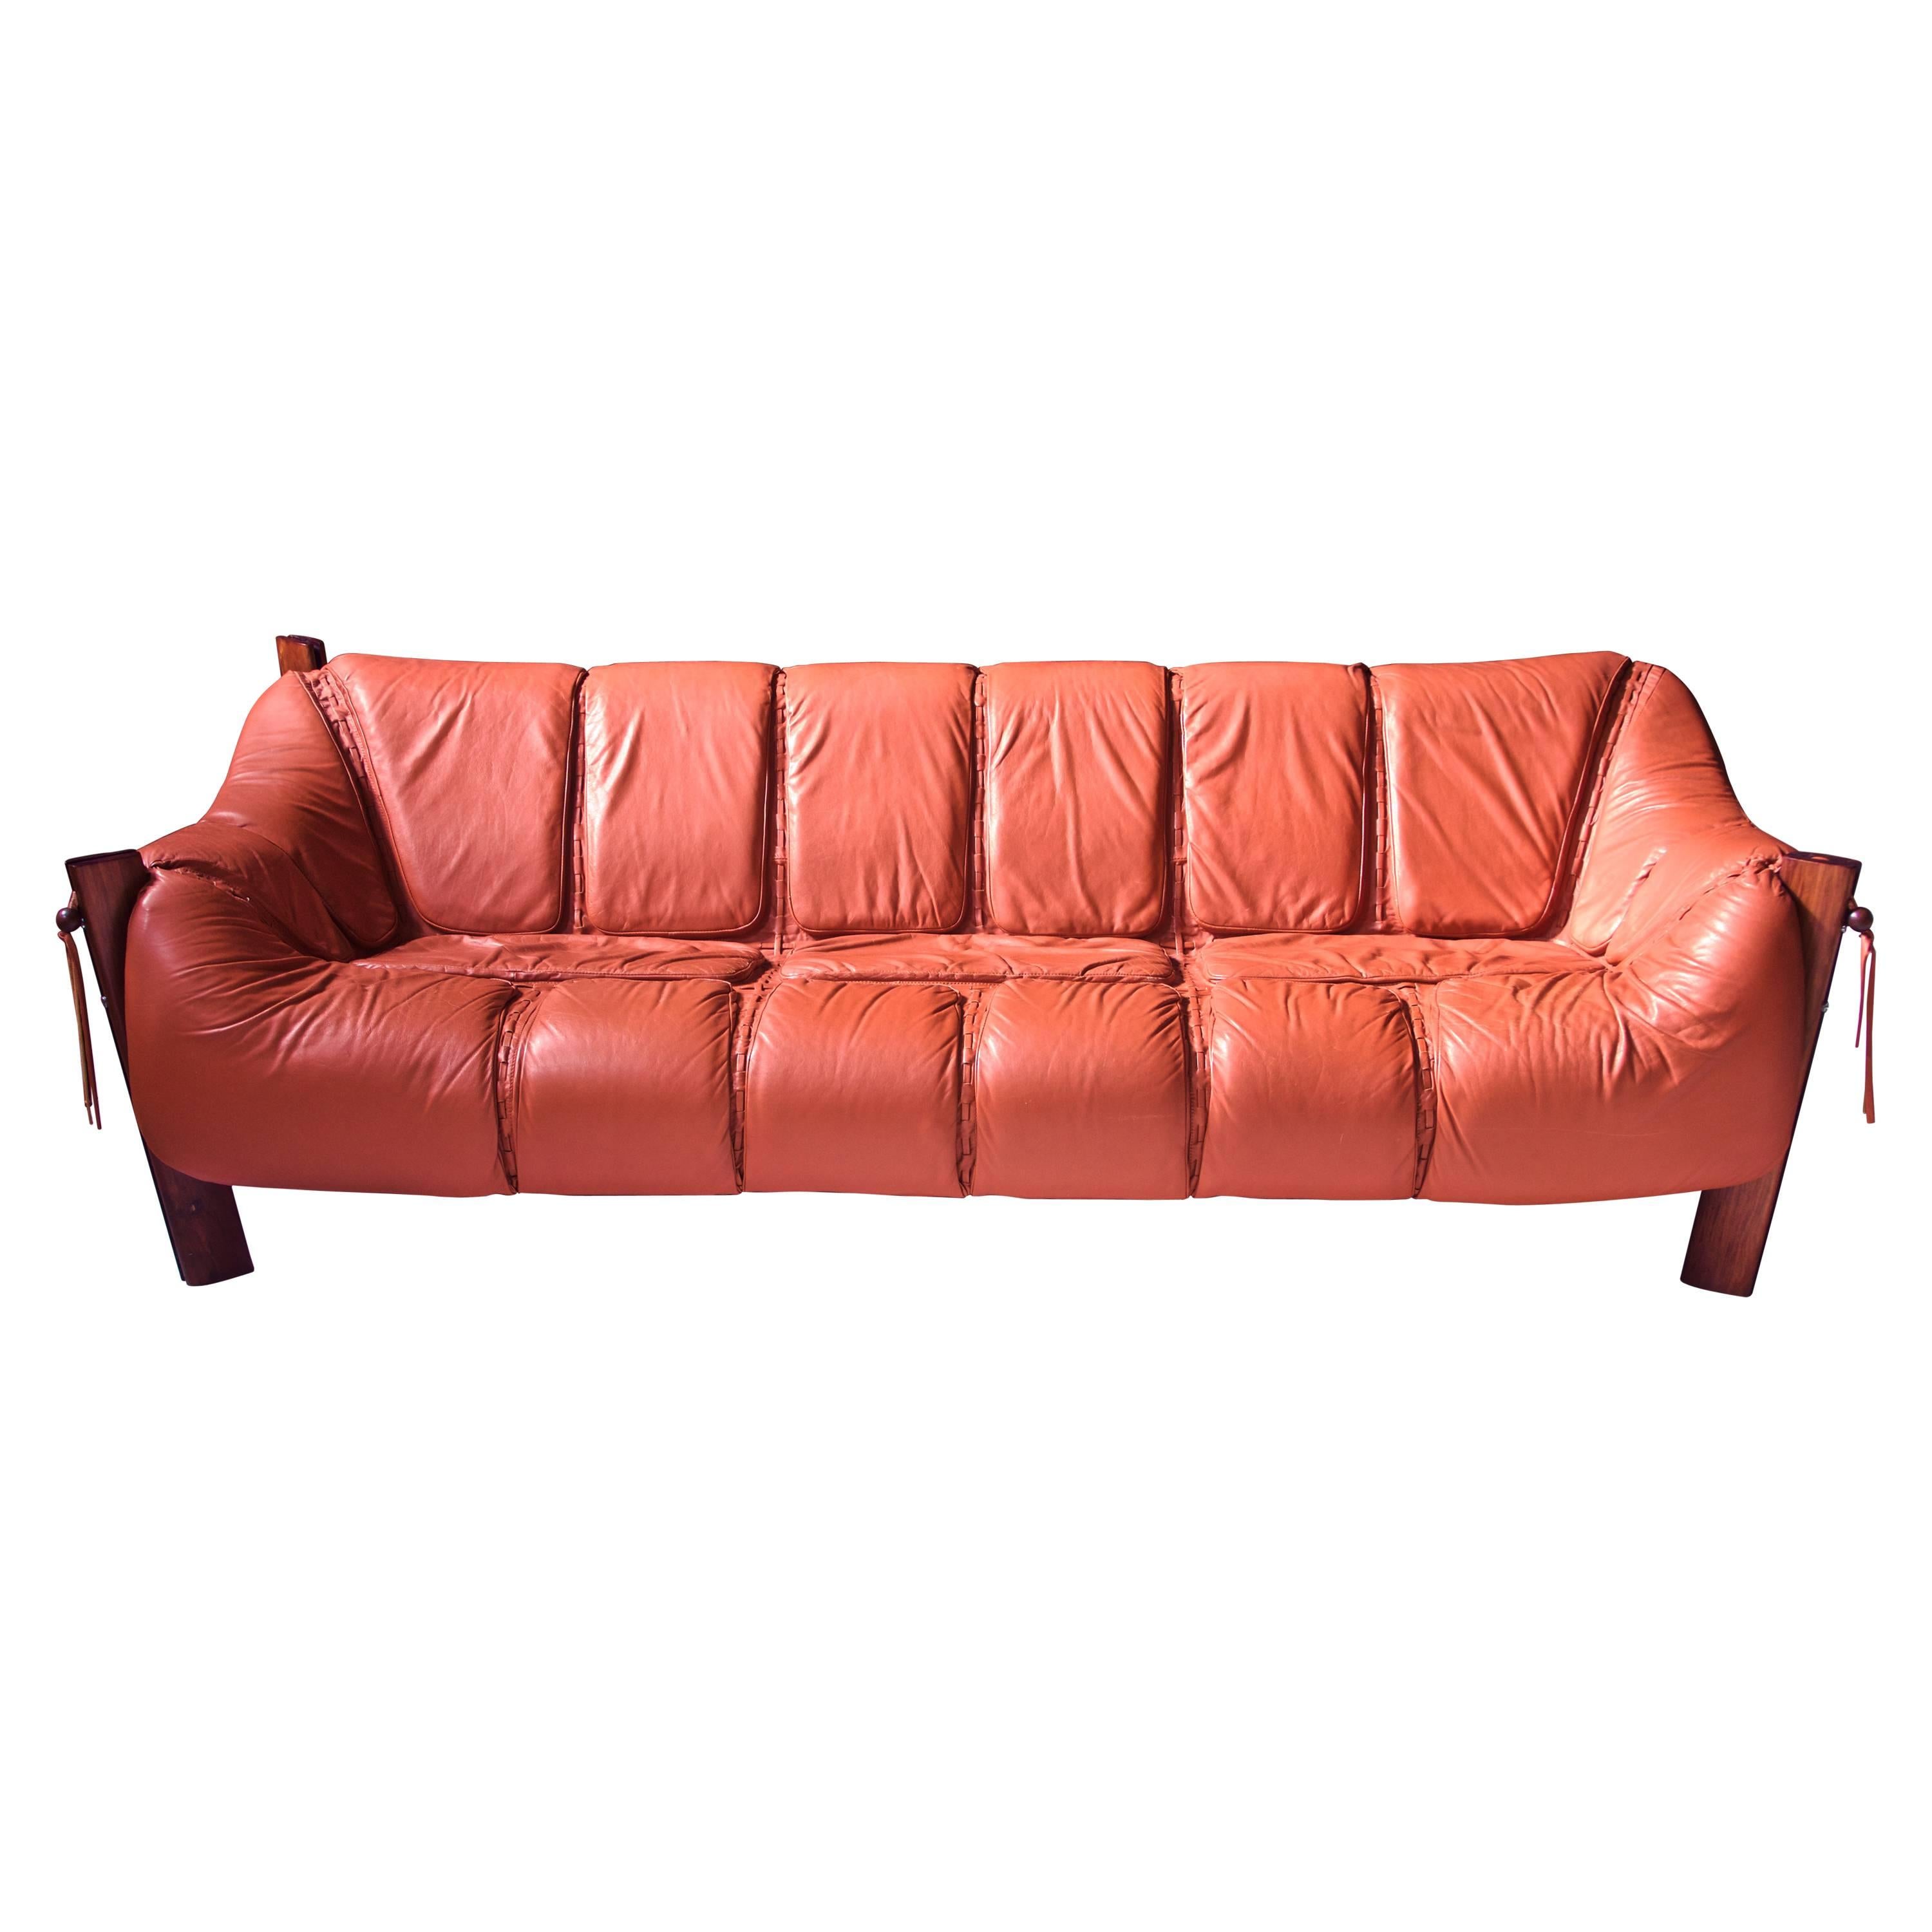 Percival Lafer MP-211 Brazilian Rosewood and Leather Sofa, 1970s